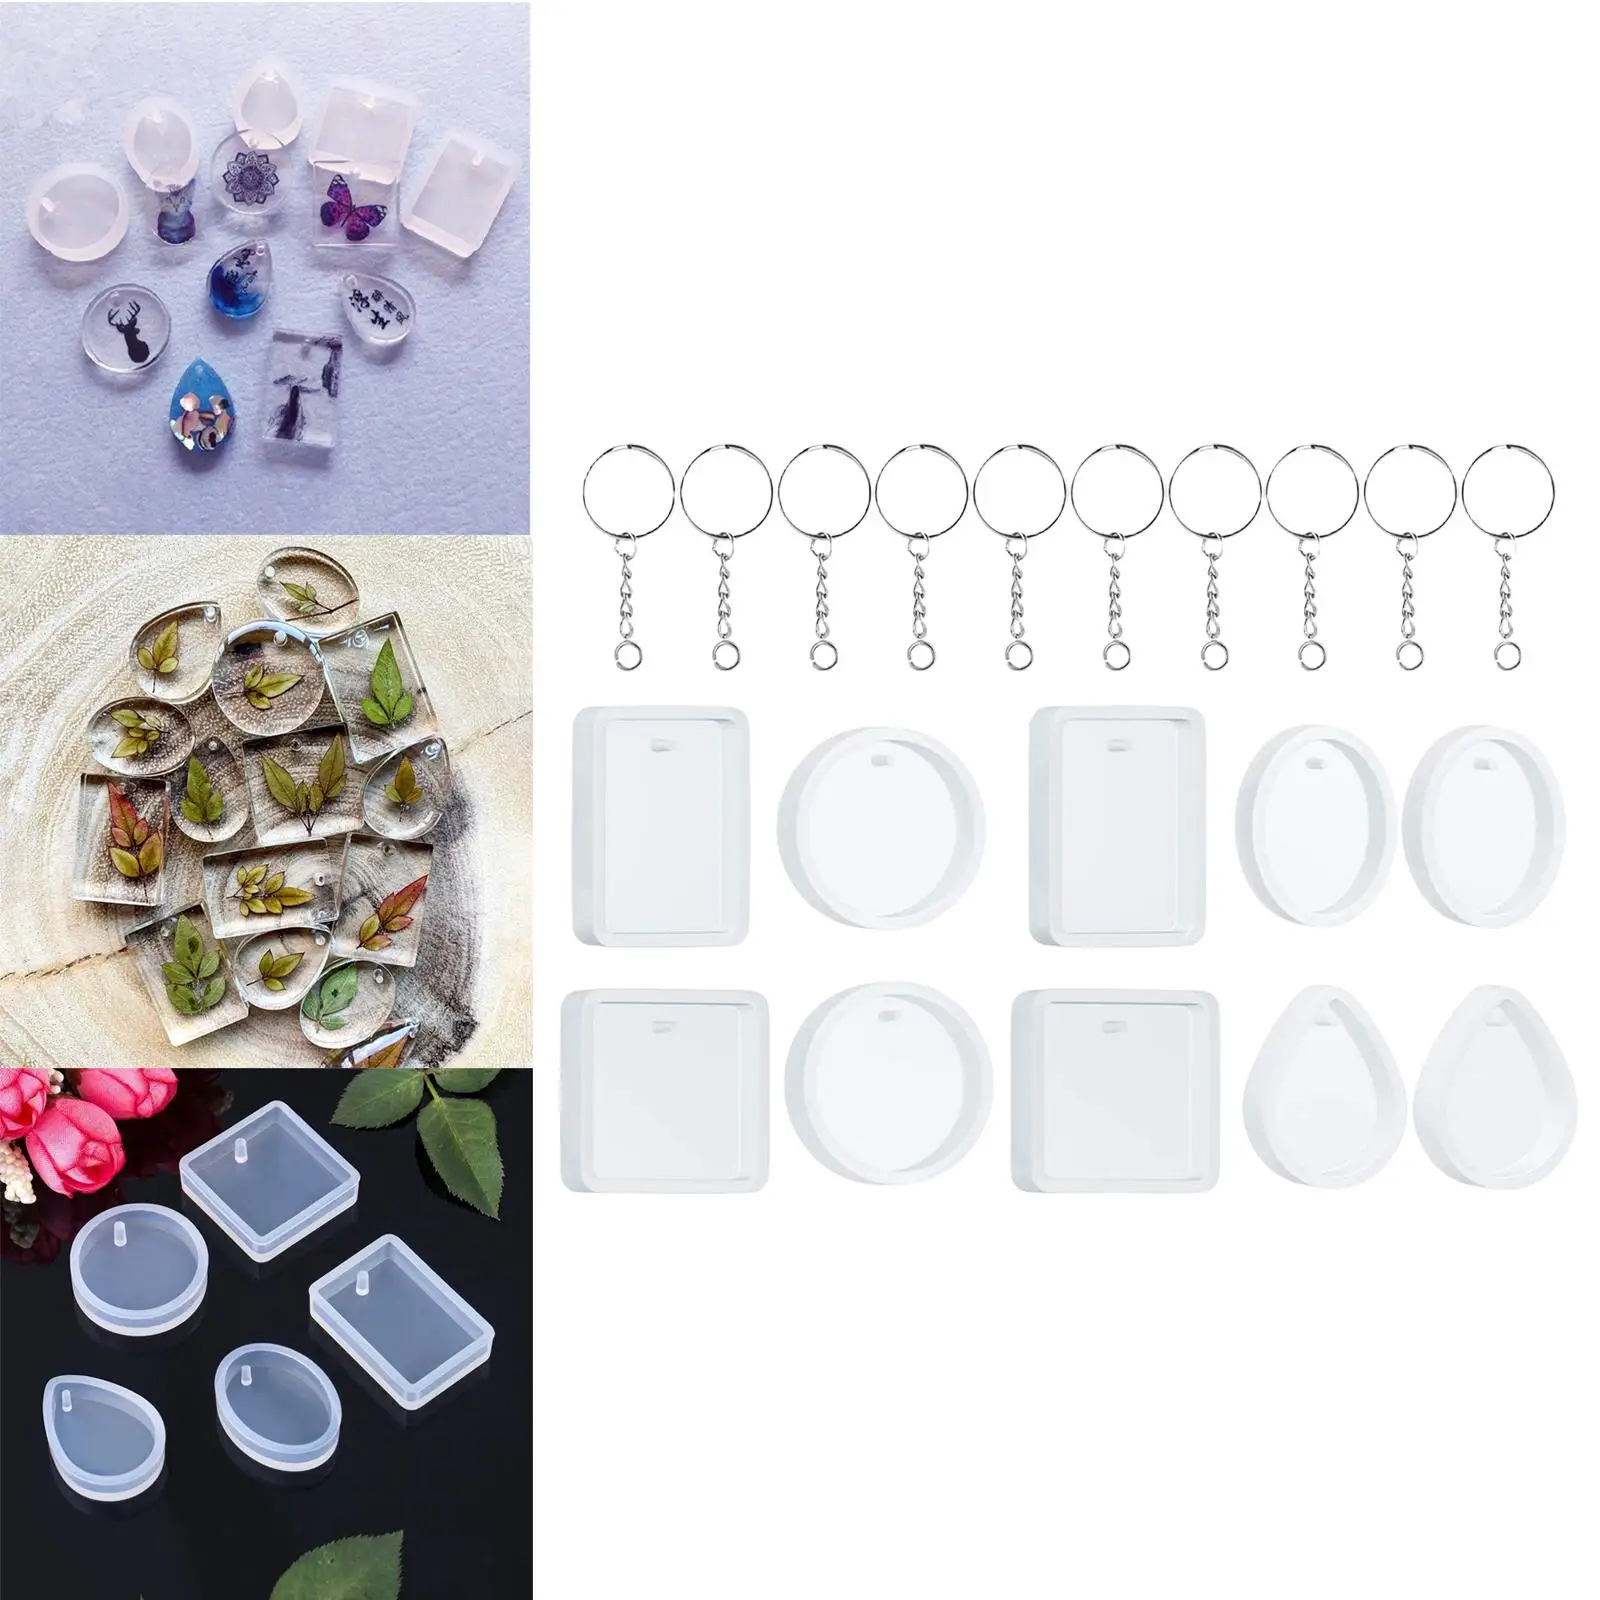 20 Pieces DIY Keychain Pendant Casting  Drop Shape with Keyrings 5 Shapes  for Keychain Pendants  Crafts Gifts